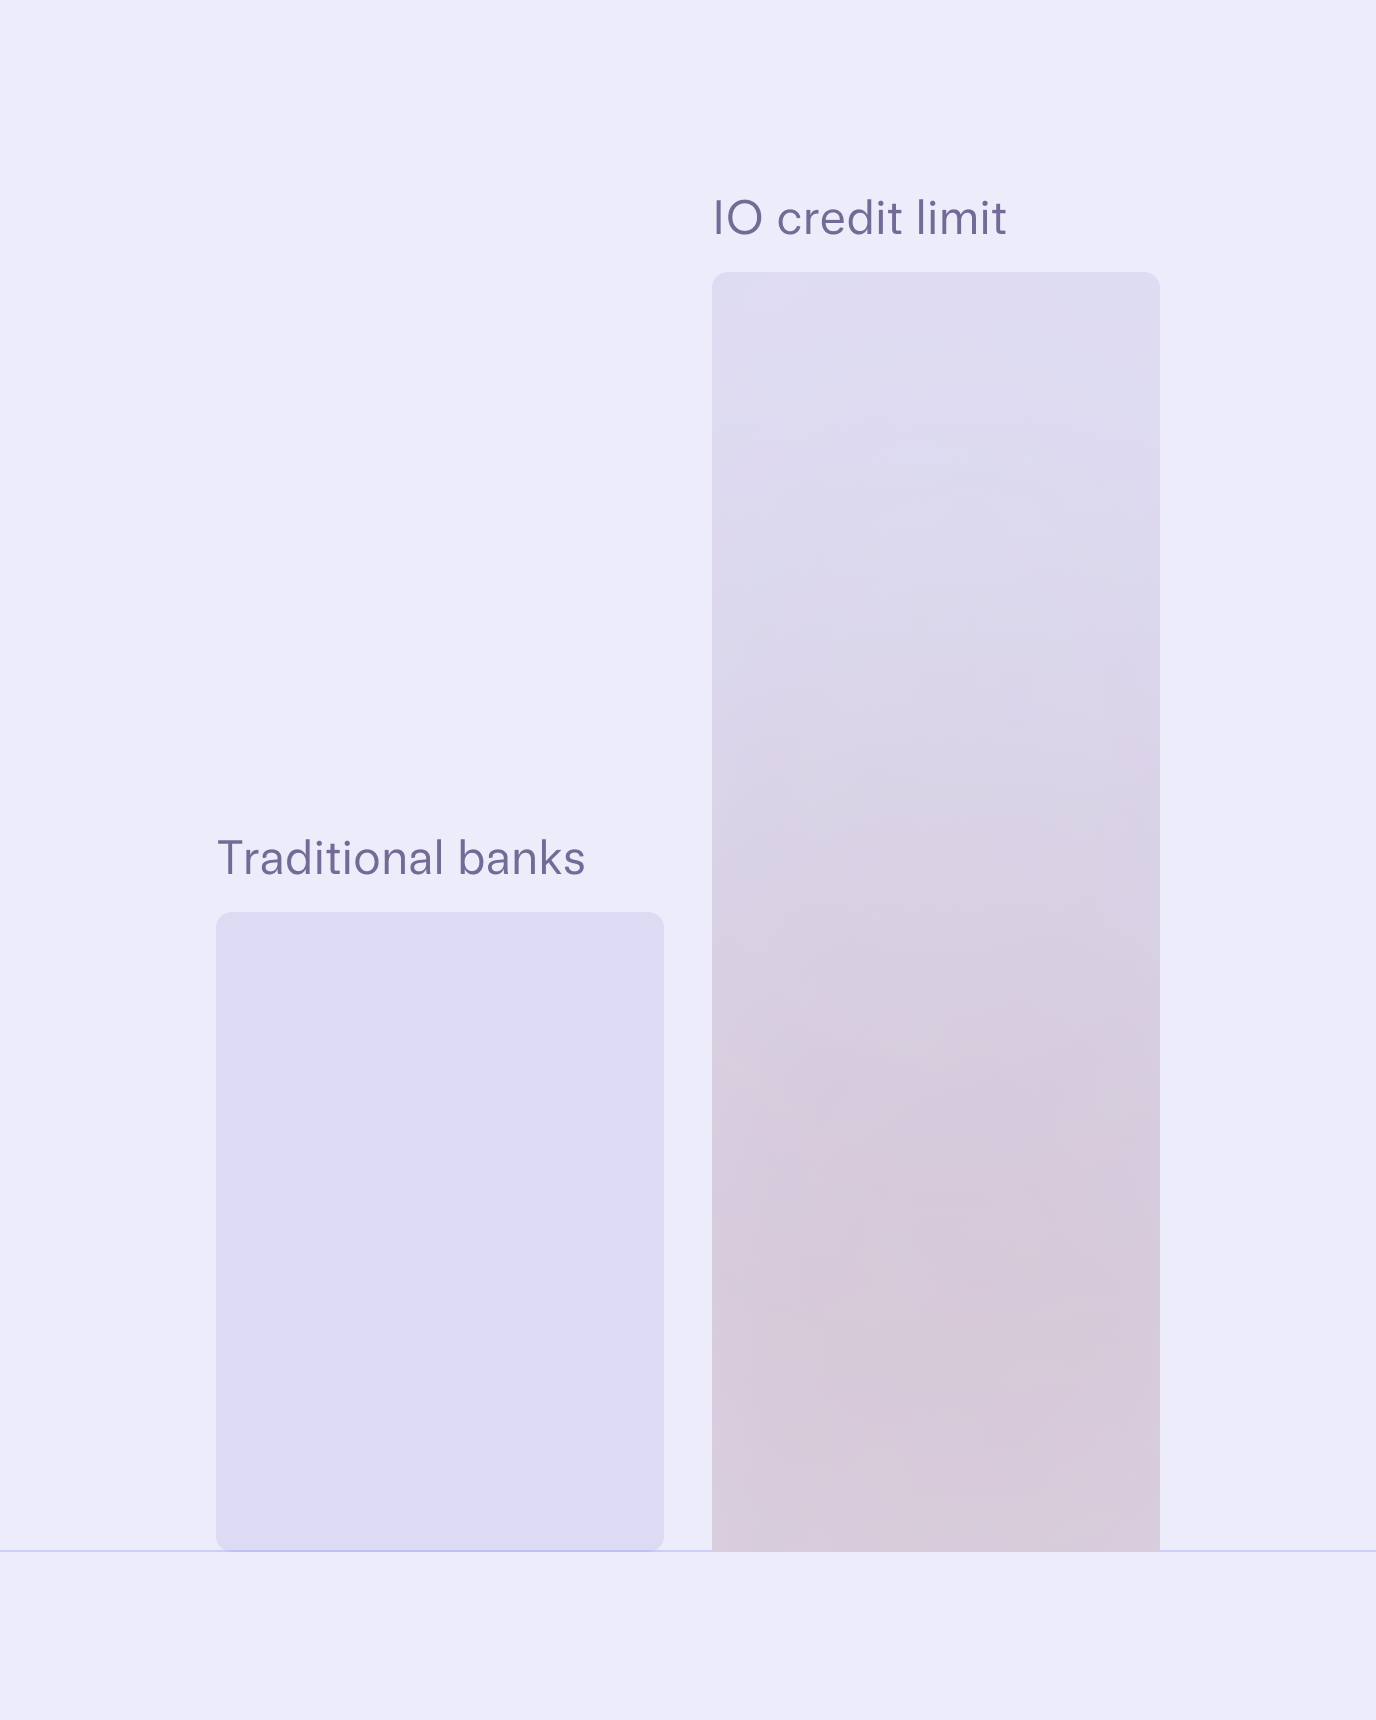 Bar chart showing IO credit limit higher than traditional banks